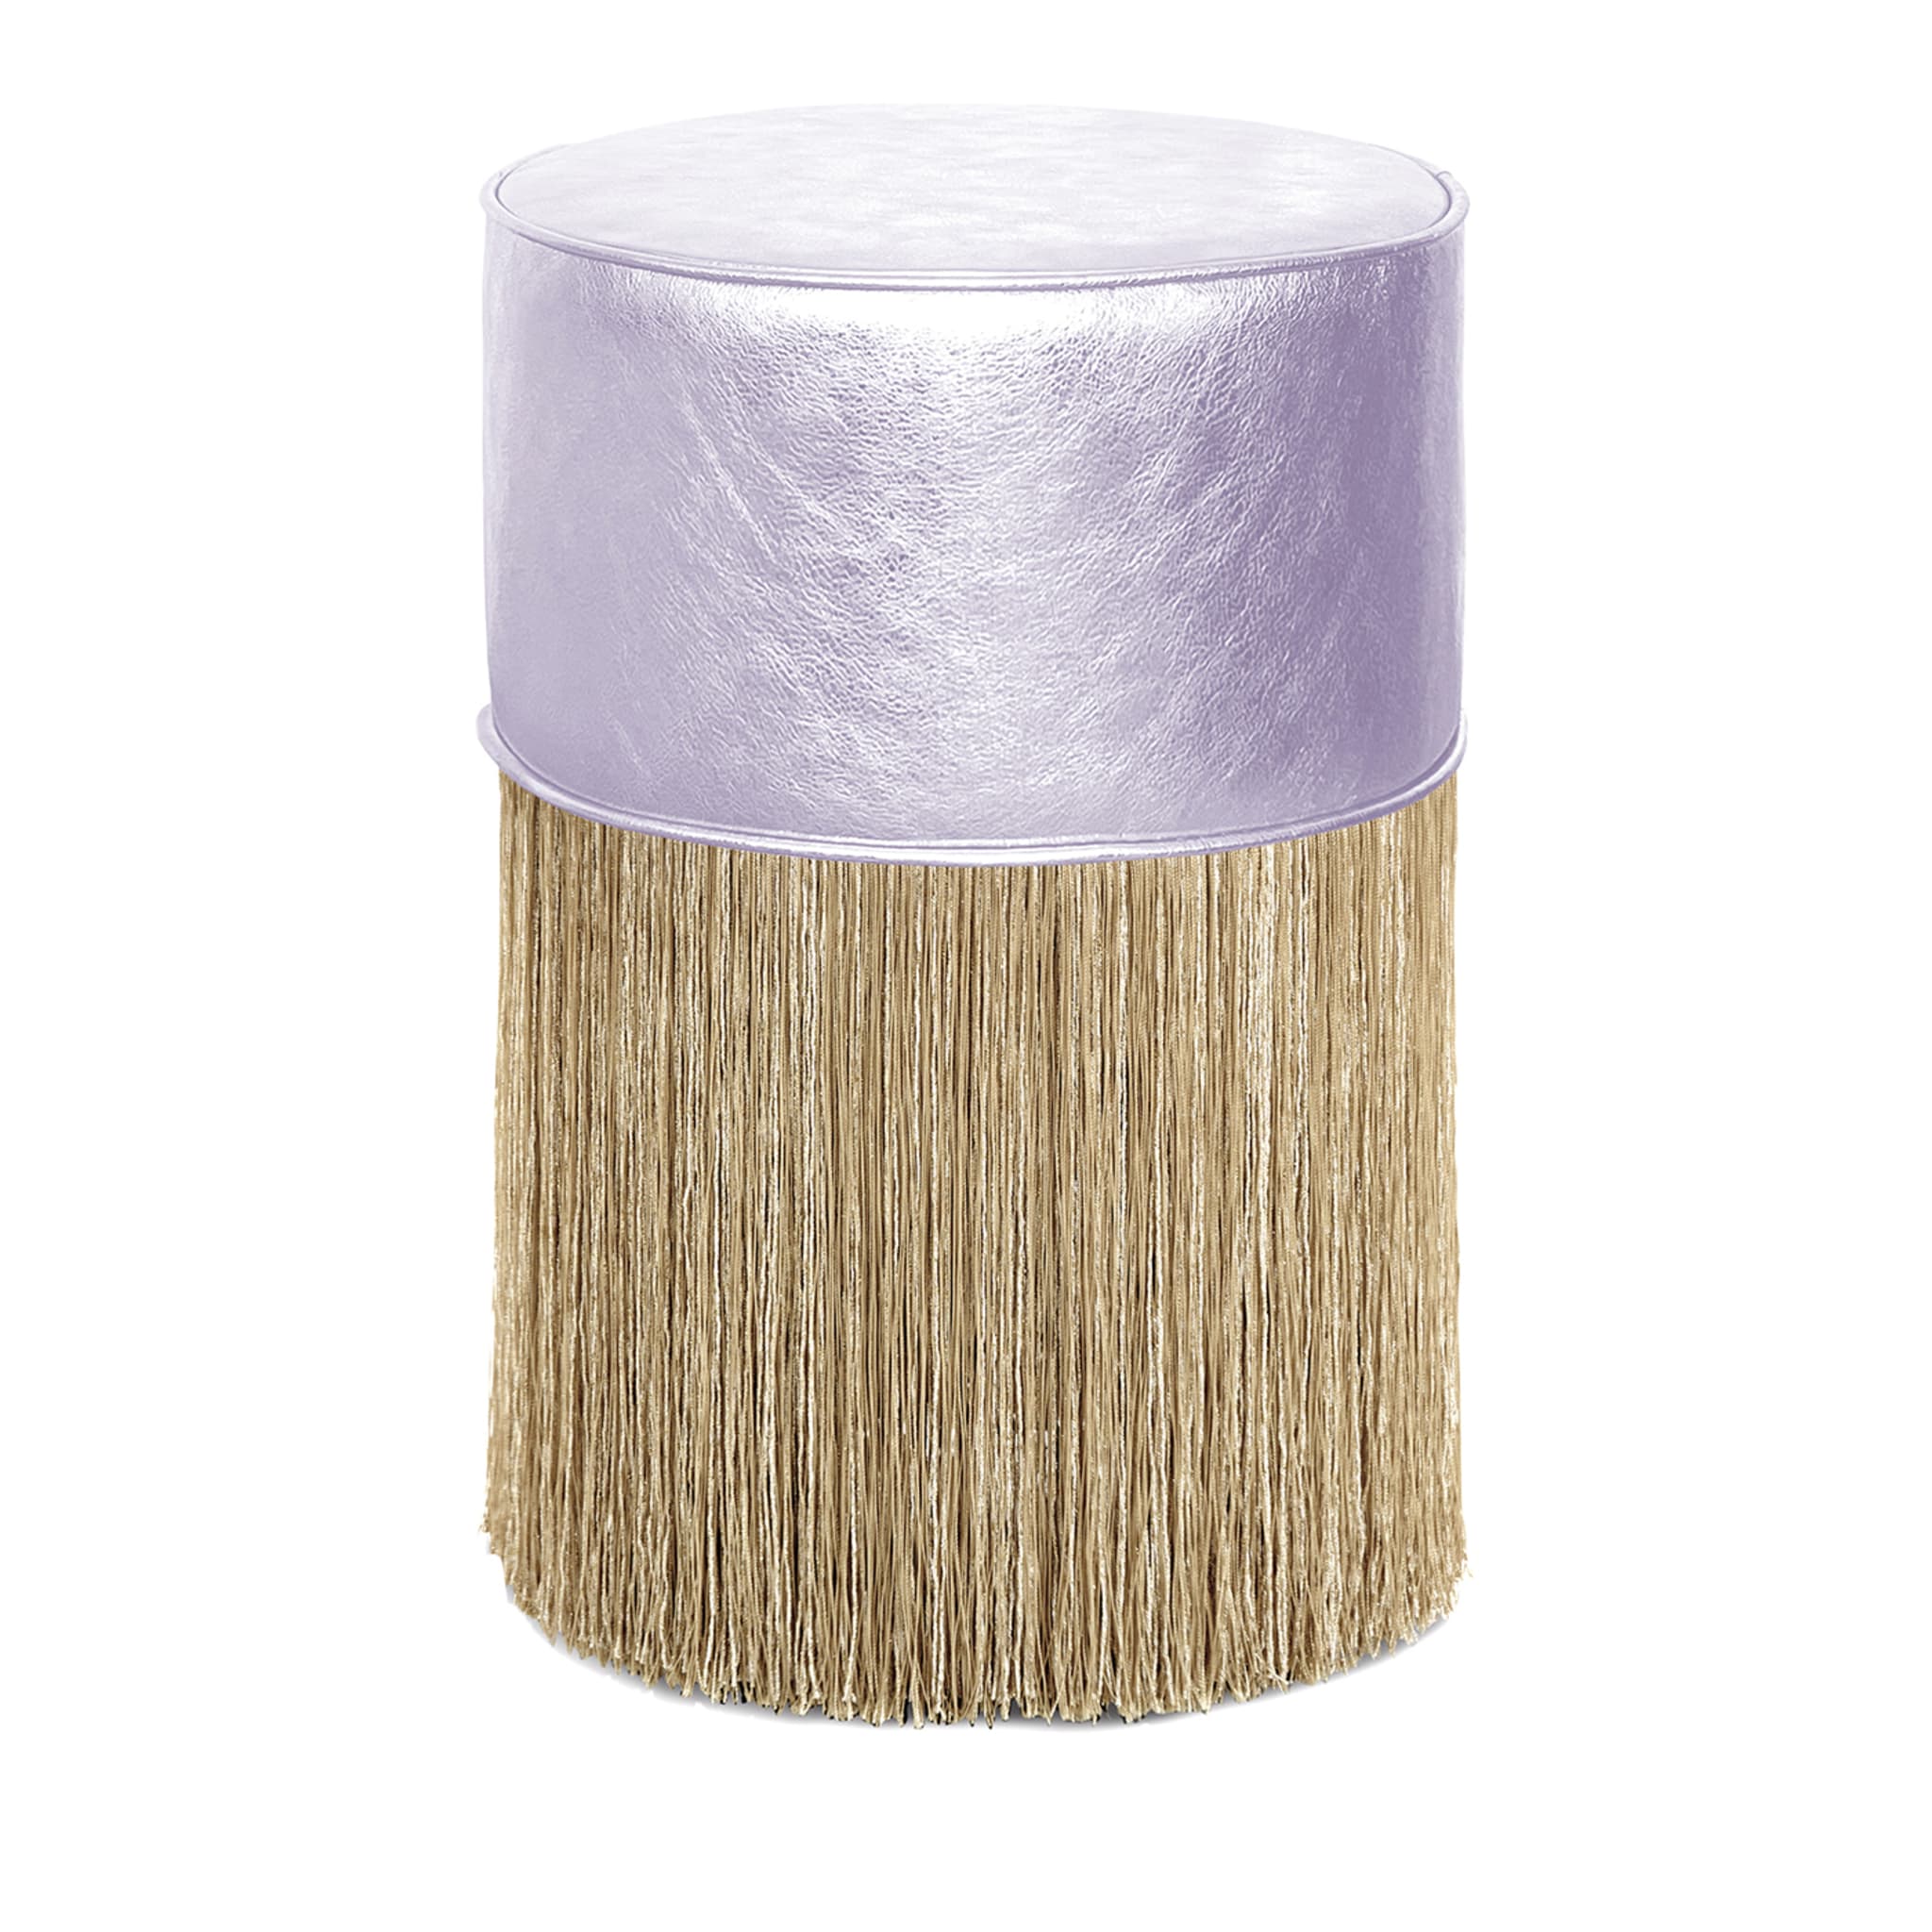 Gleaming Lillac Leather Gold Fringes Pouf by Lorenza Bozzol - Main view